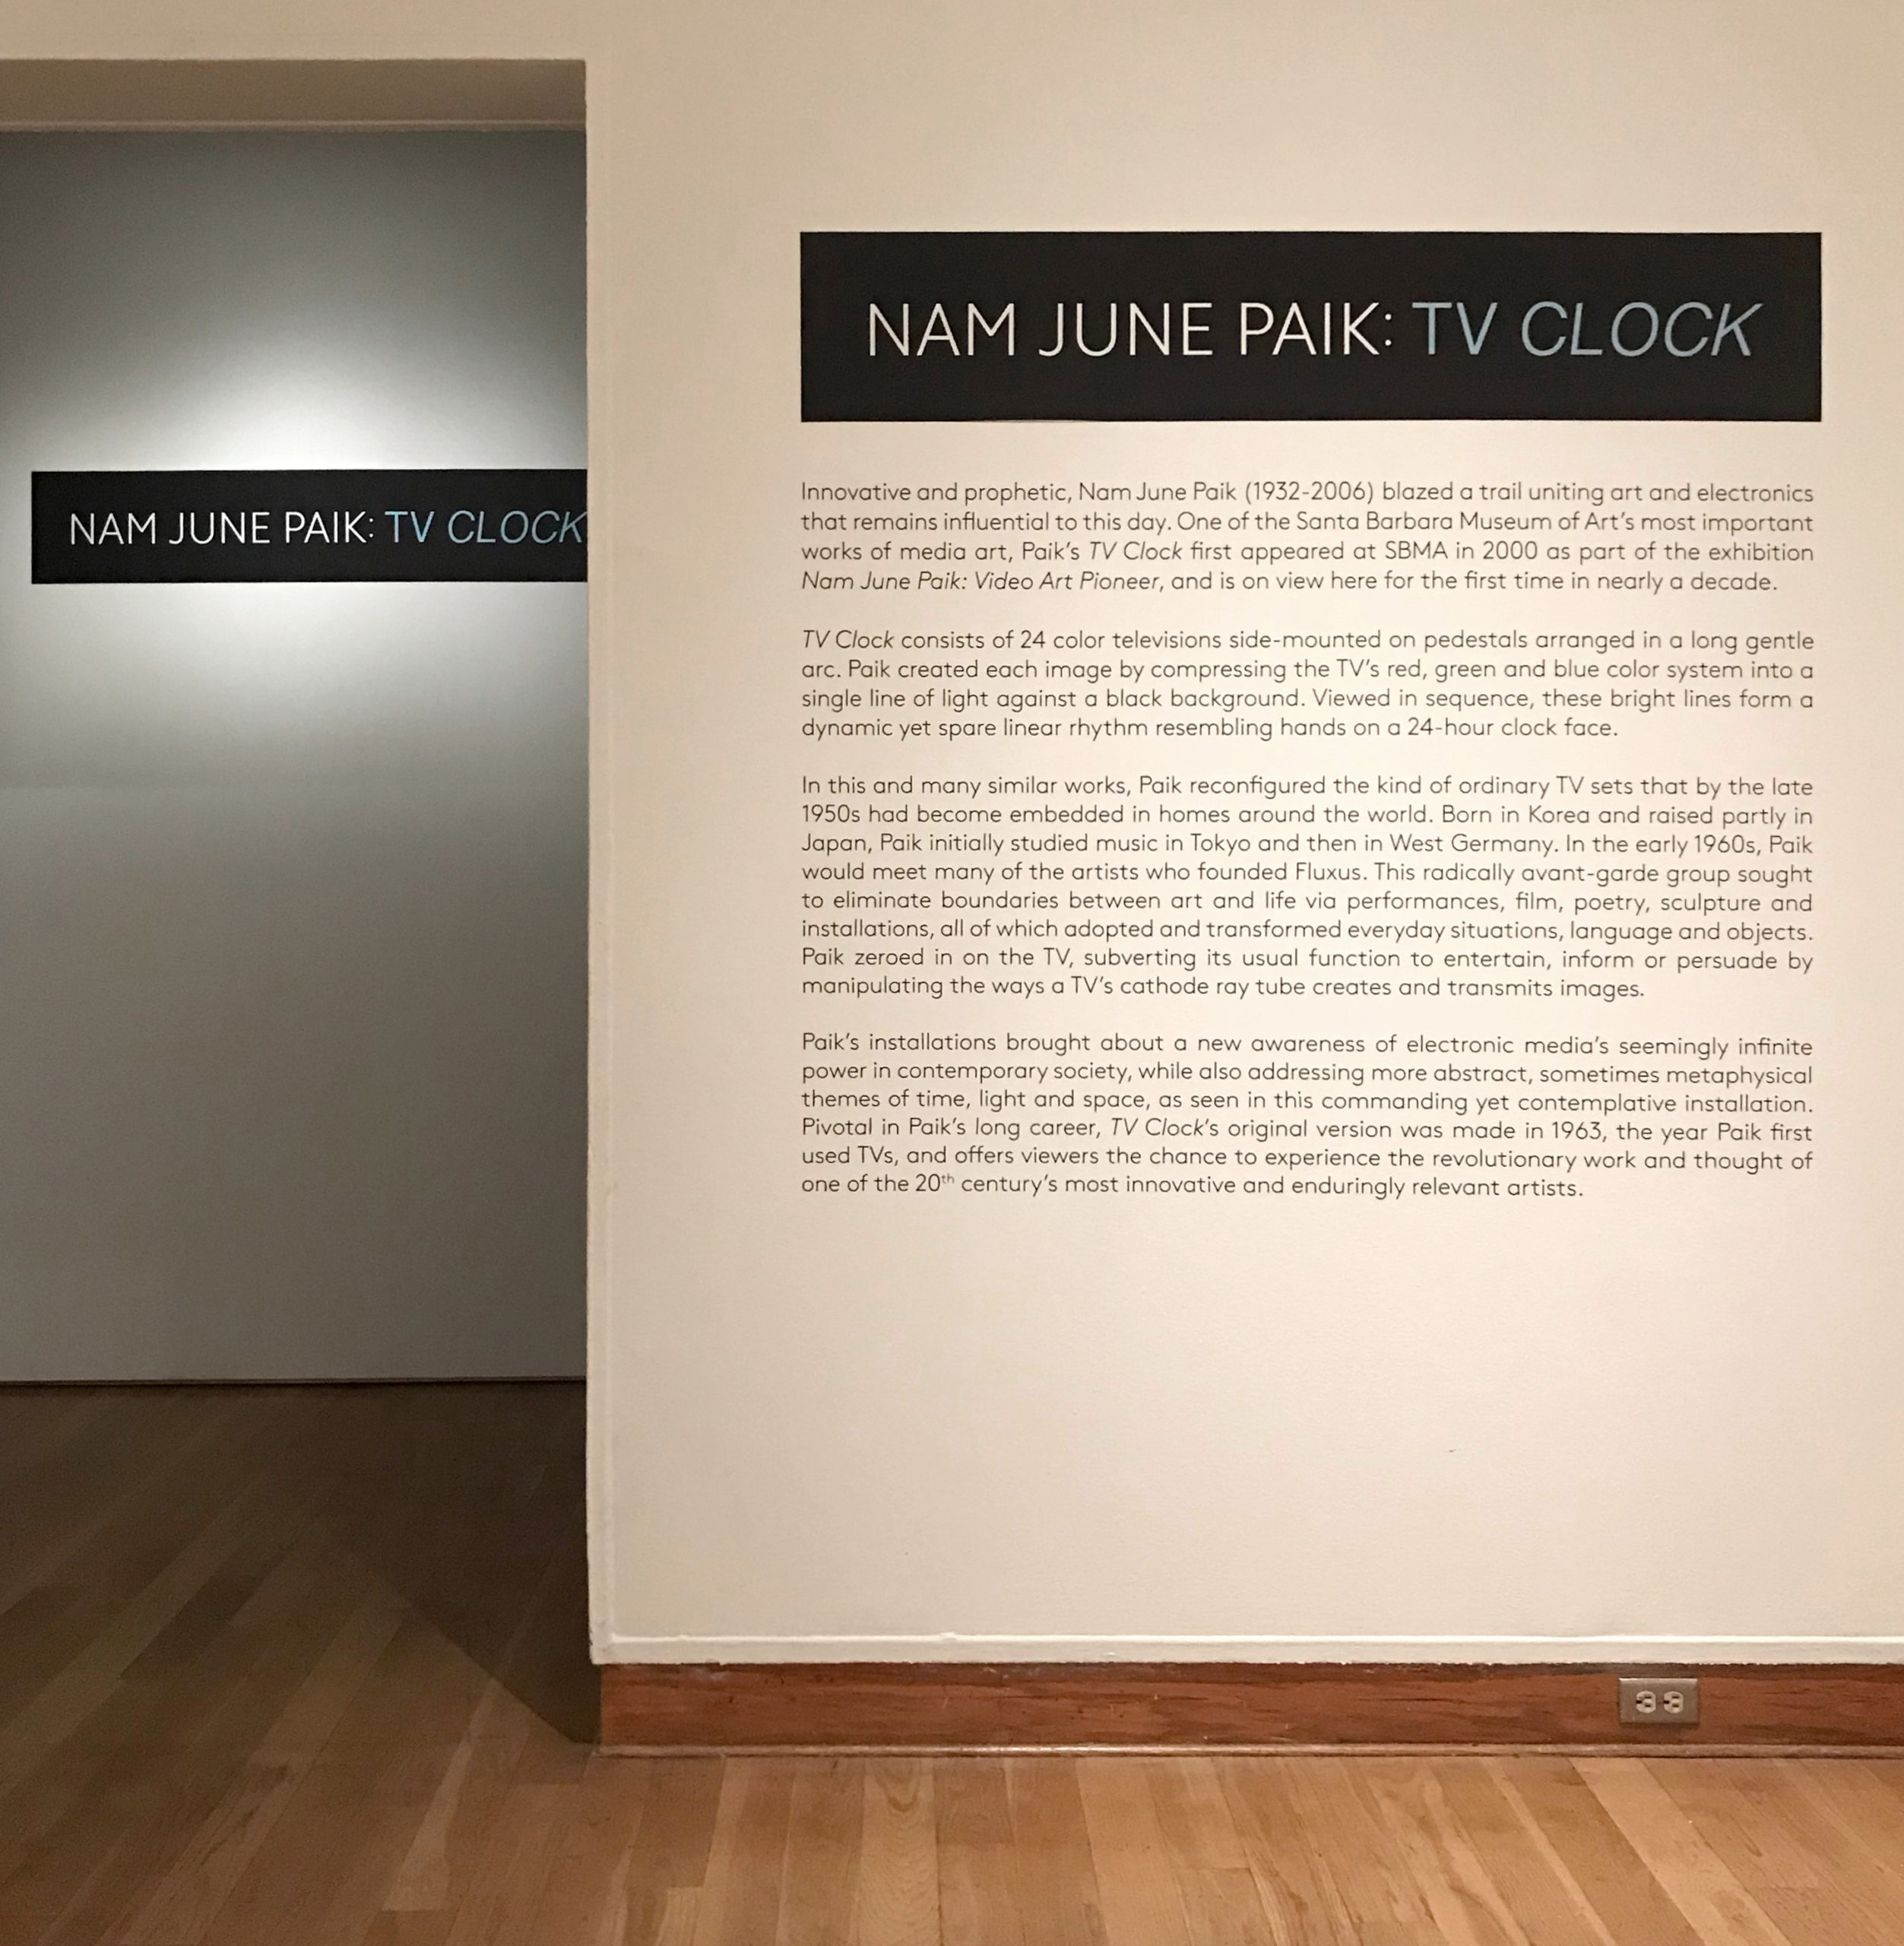 Example of vinyl signage design for the Nam June Paik: TV Clock exhibition at the SBMA